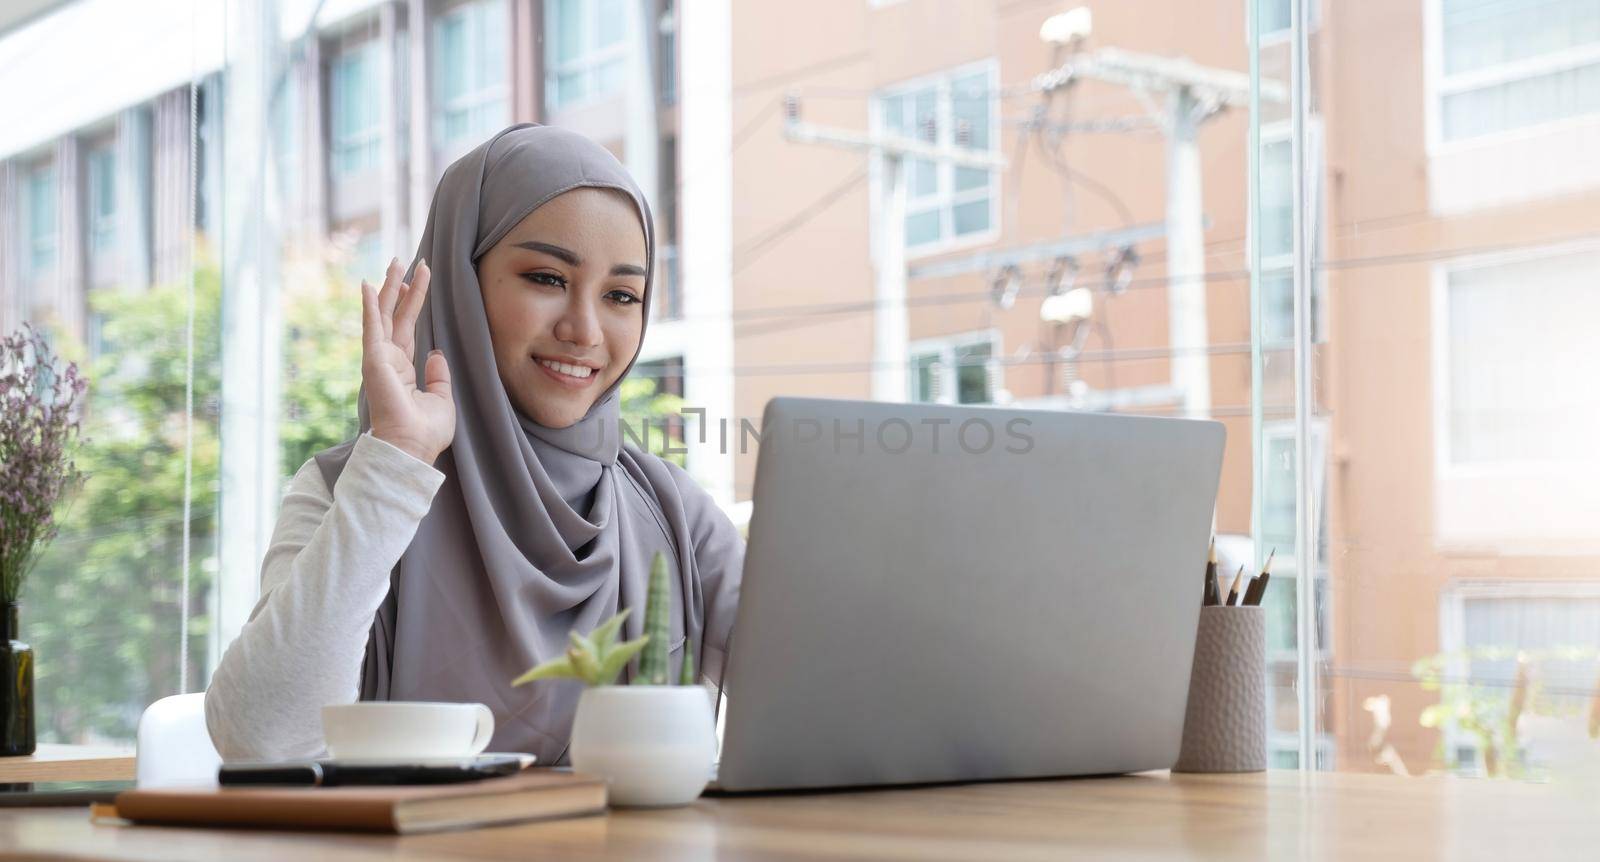 smiling beautiful muslim businesswoman using a laptop for online video meeting sitting at the desk in modern office space, looks at the webcam and waving hello.